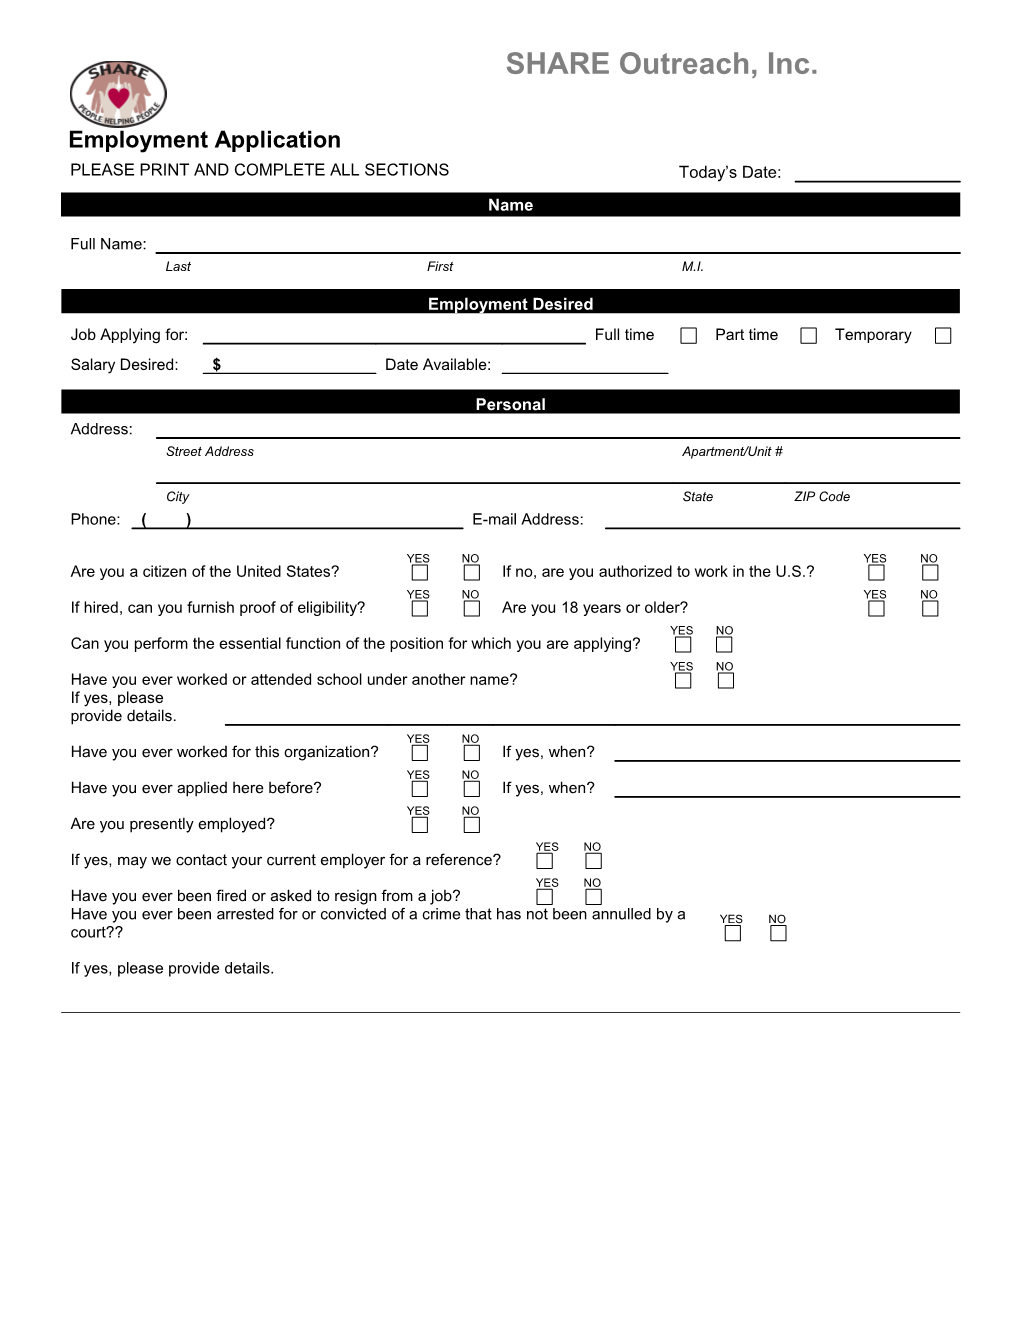 Please Print and Complete All Sections